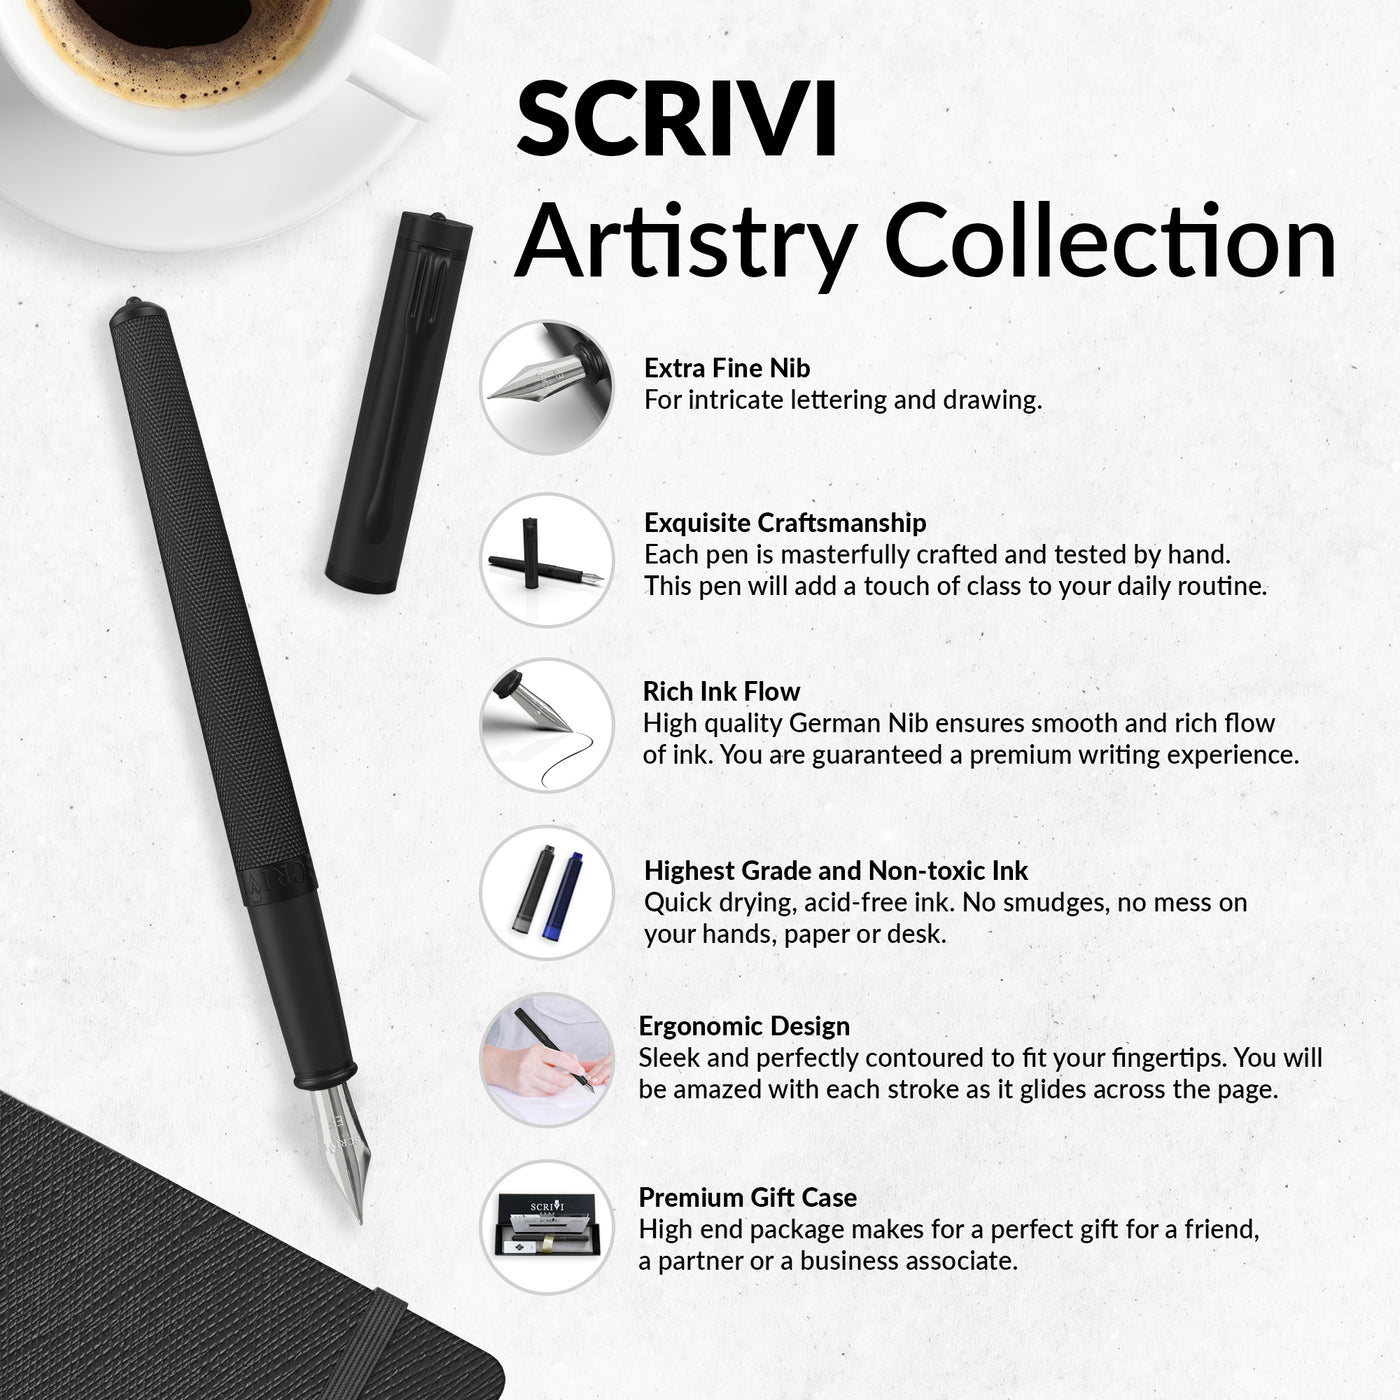 SCRIVI PENS Fountain Pen Set, [Extra Fine Nib], Artistry Collection, Gift  Case; 2 Ink Cartridges, Ink Refill Converter, Calligraphy, Smooth Writing